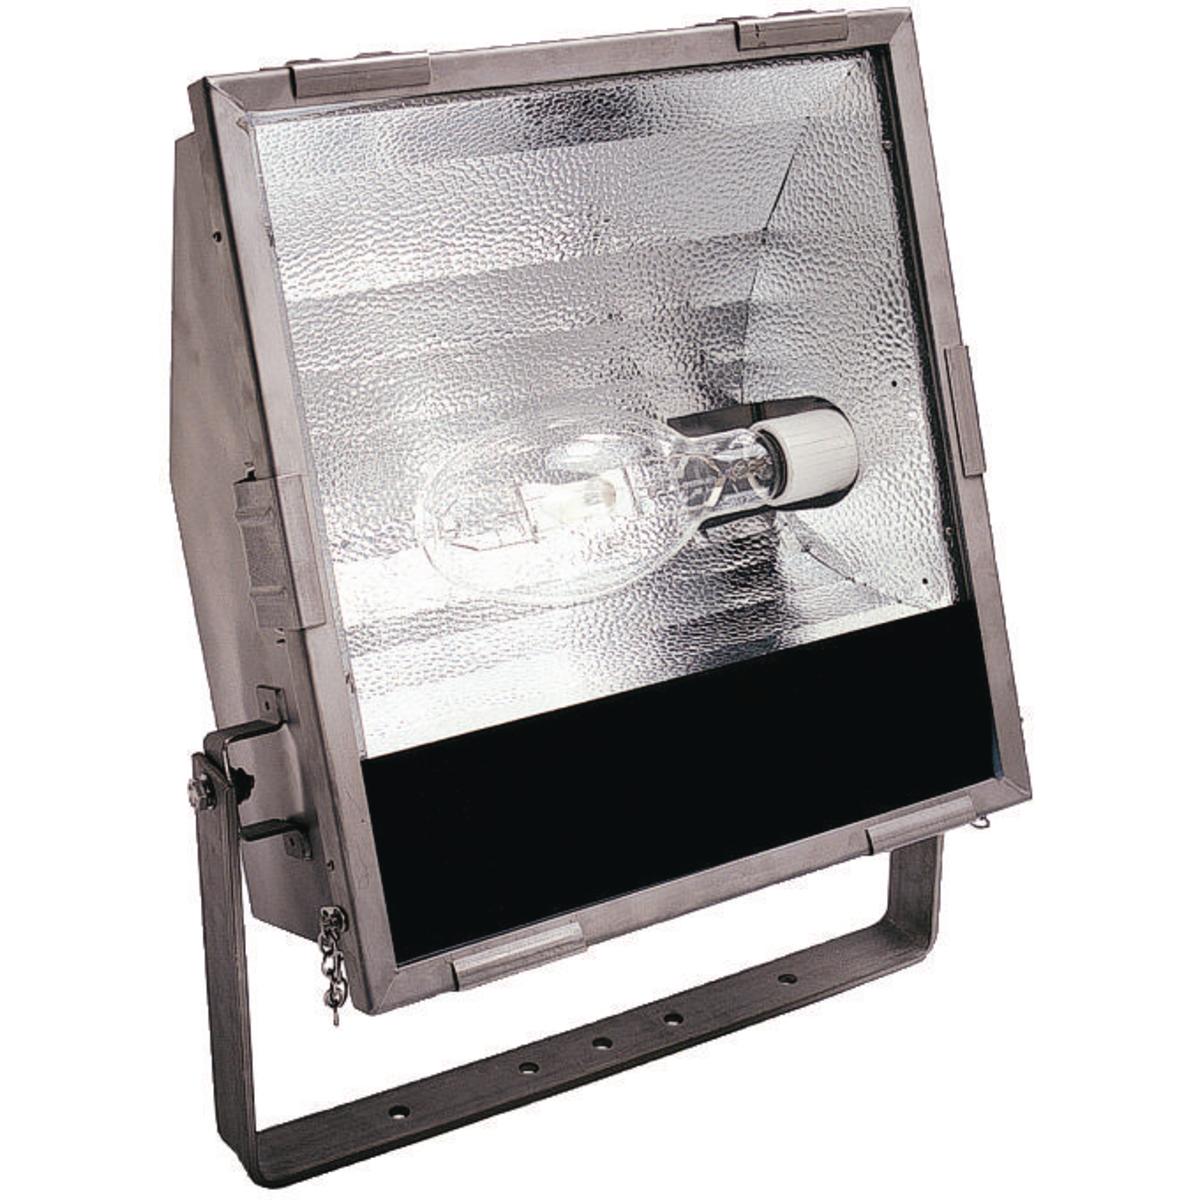 Hubbell KFS250SS KFSS Series - Stainless Steel 250 Watt High Pressure Sodium Marine Floodlight (Lamp Not Included) - Quadri-Volt (120/208/240/277V) At 60Hz  ; Type 316 Stainless Steel Housing. 16-gauge housing ensures low corrosion and long life, reducing maintenance cost